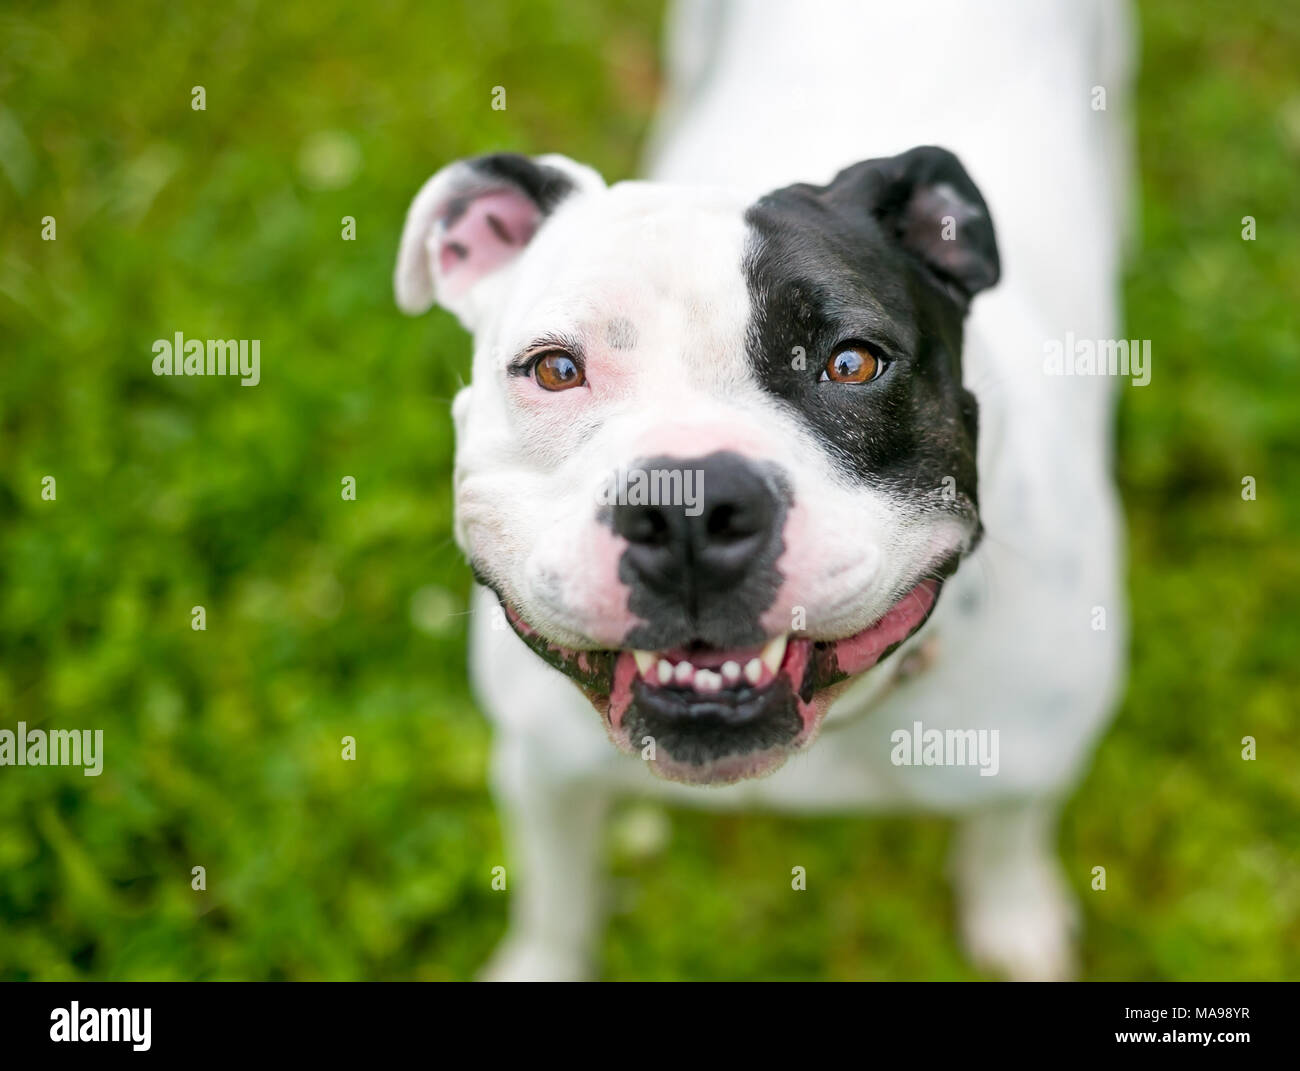 A happy black and white Staffordshire Bull Terrier dog Stock Photo